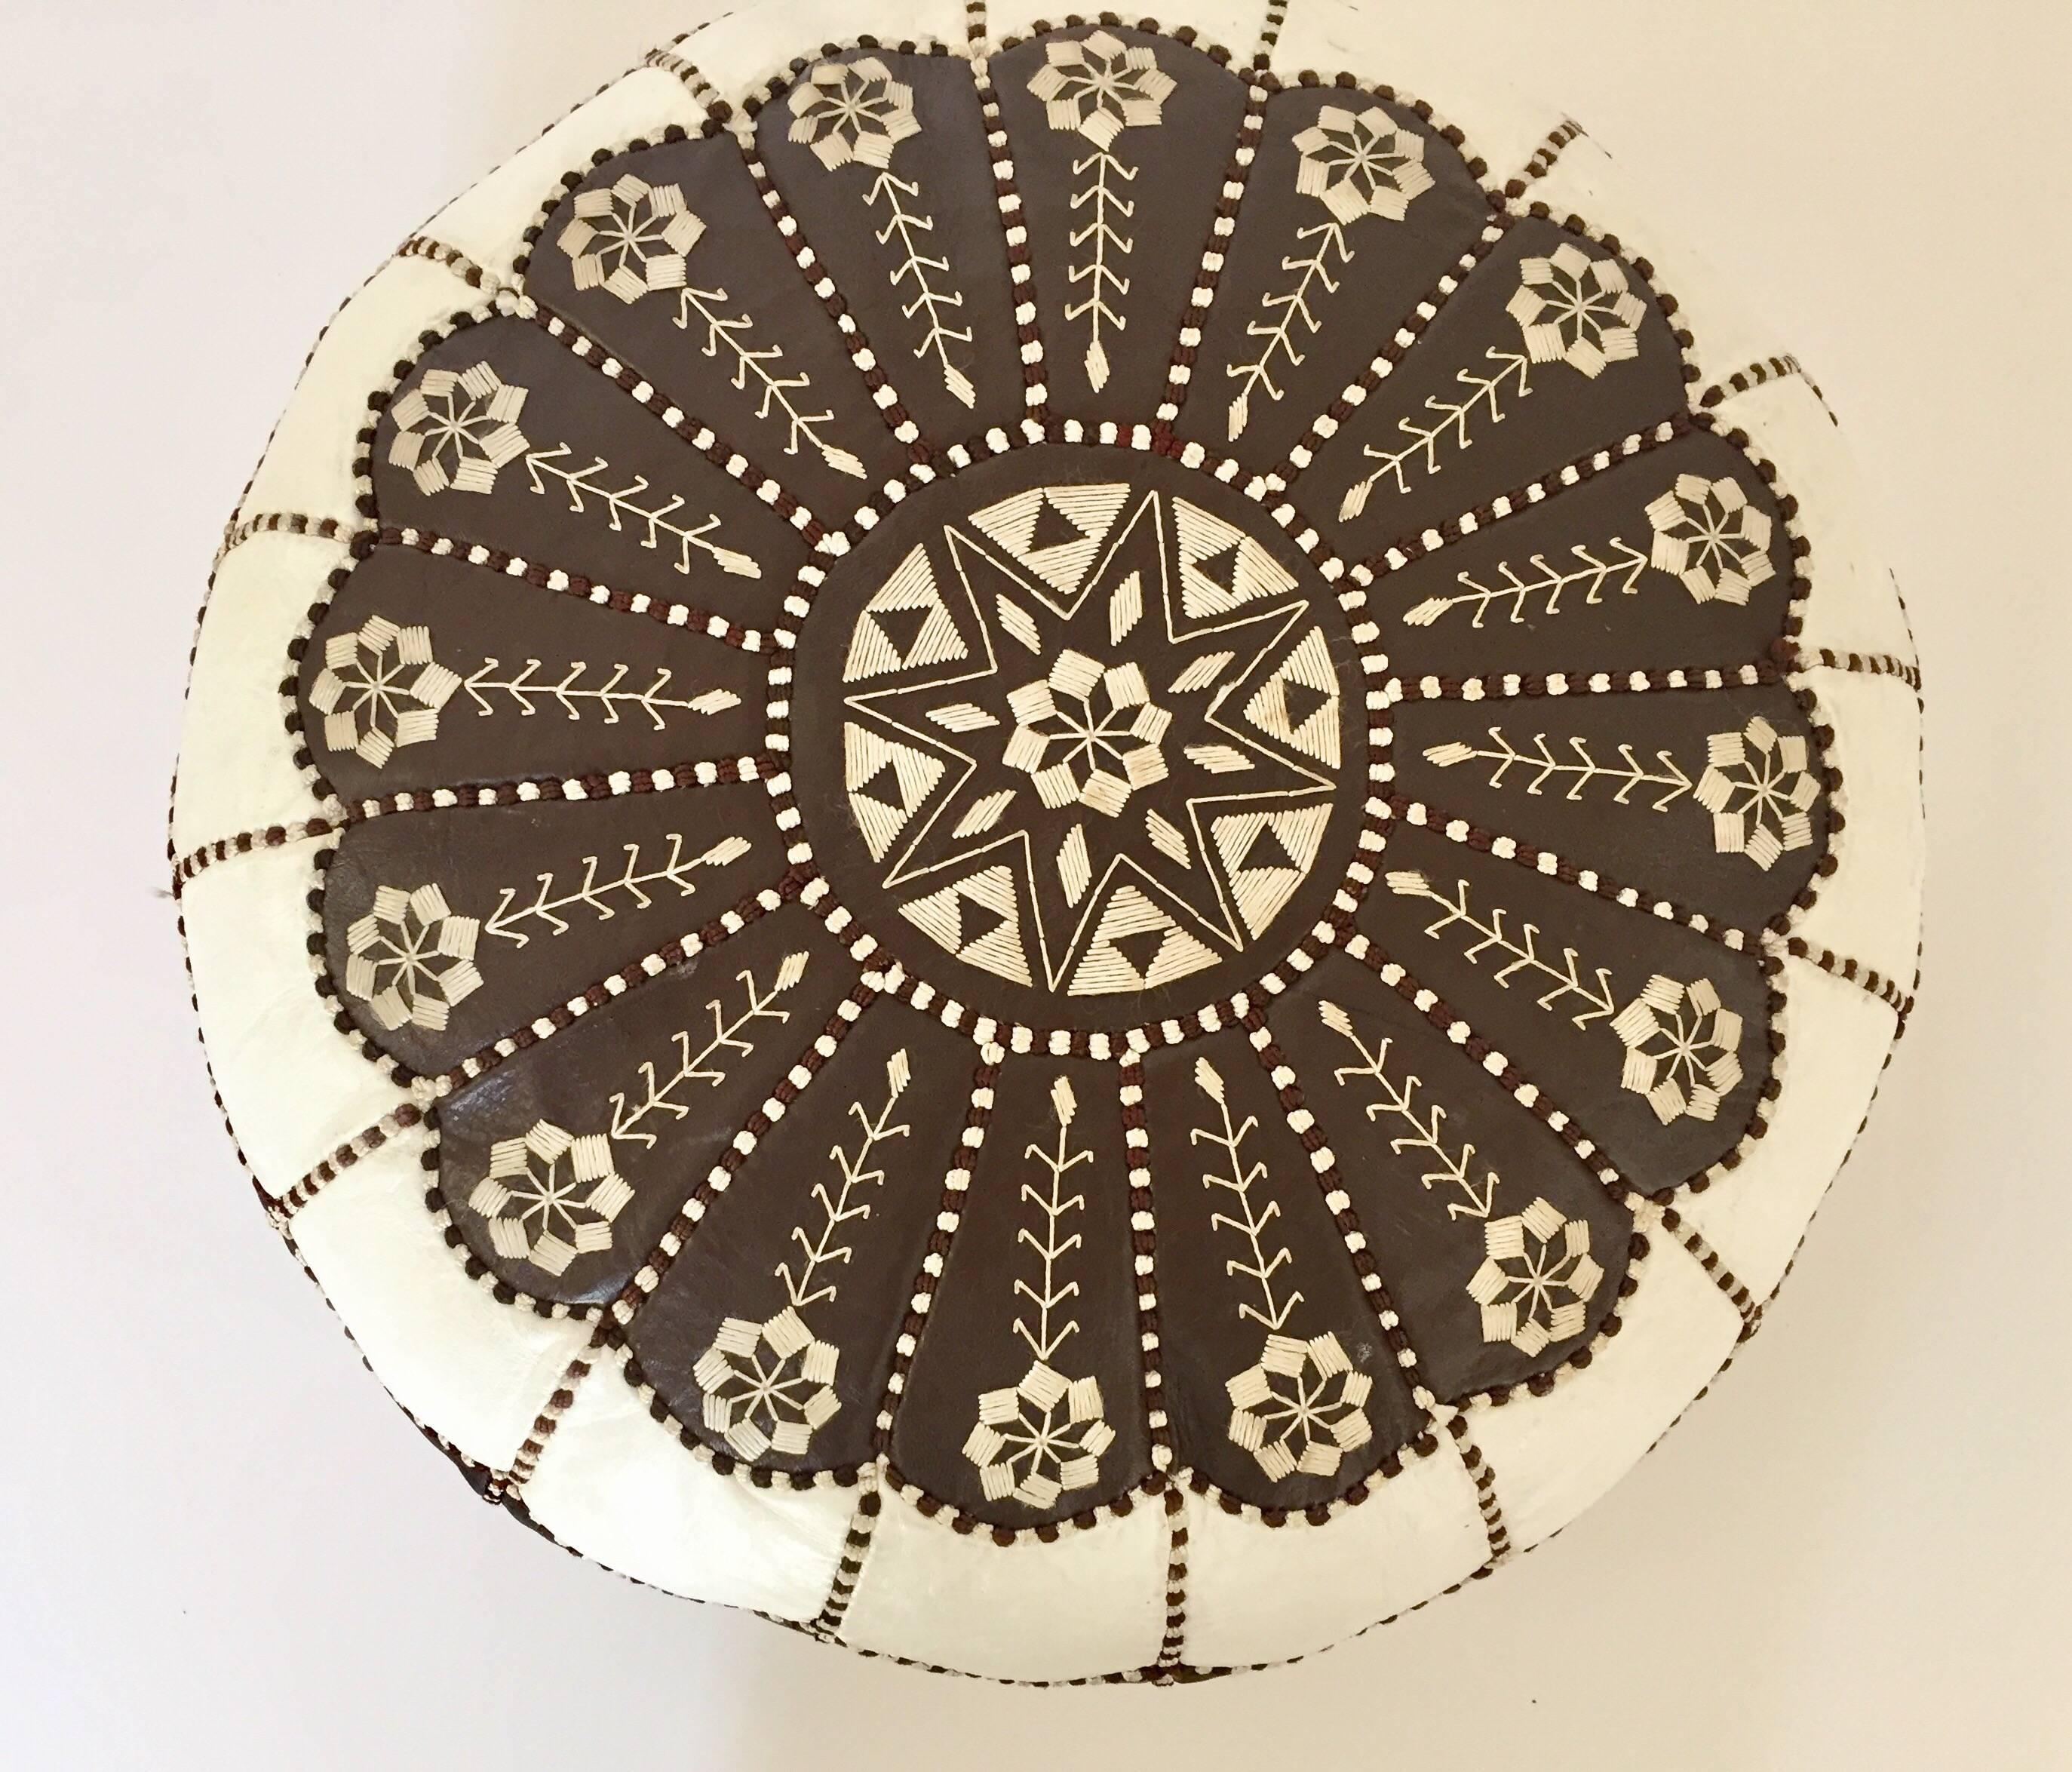 Vintage Moroccan white and brown colors round pouf hand tooled and embroidered in Marrakesh.
Beautiful geometrical designs are hand-stitched on this Moroccan stool by expert Artisan.
Use these round handcrafted poufs as ottoman or accent side